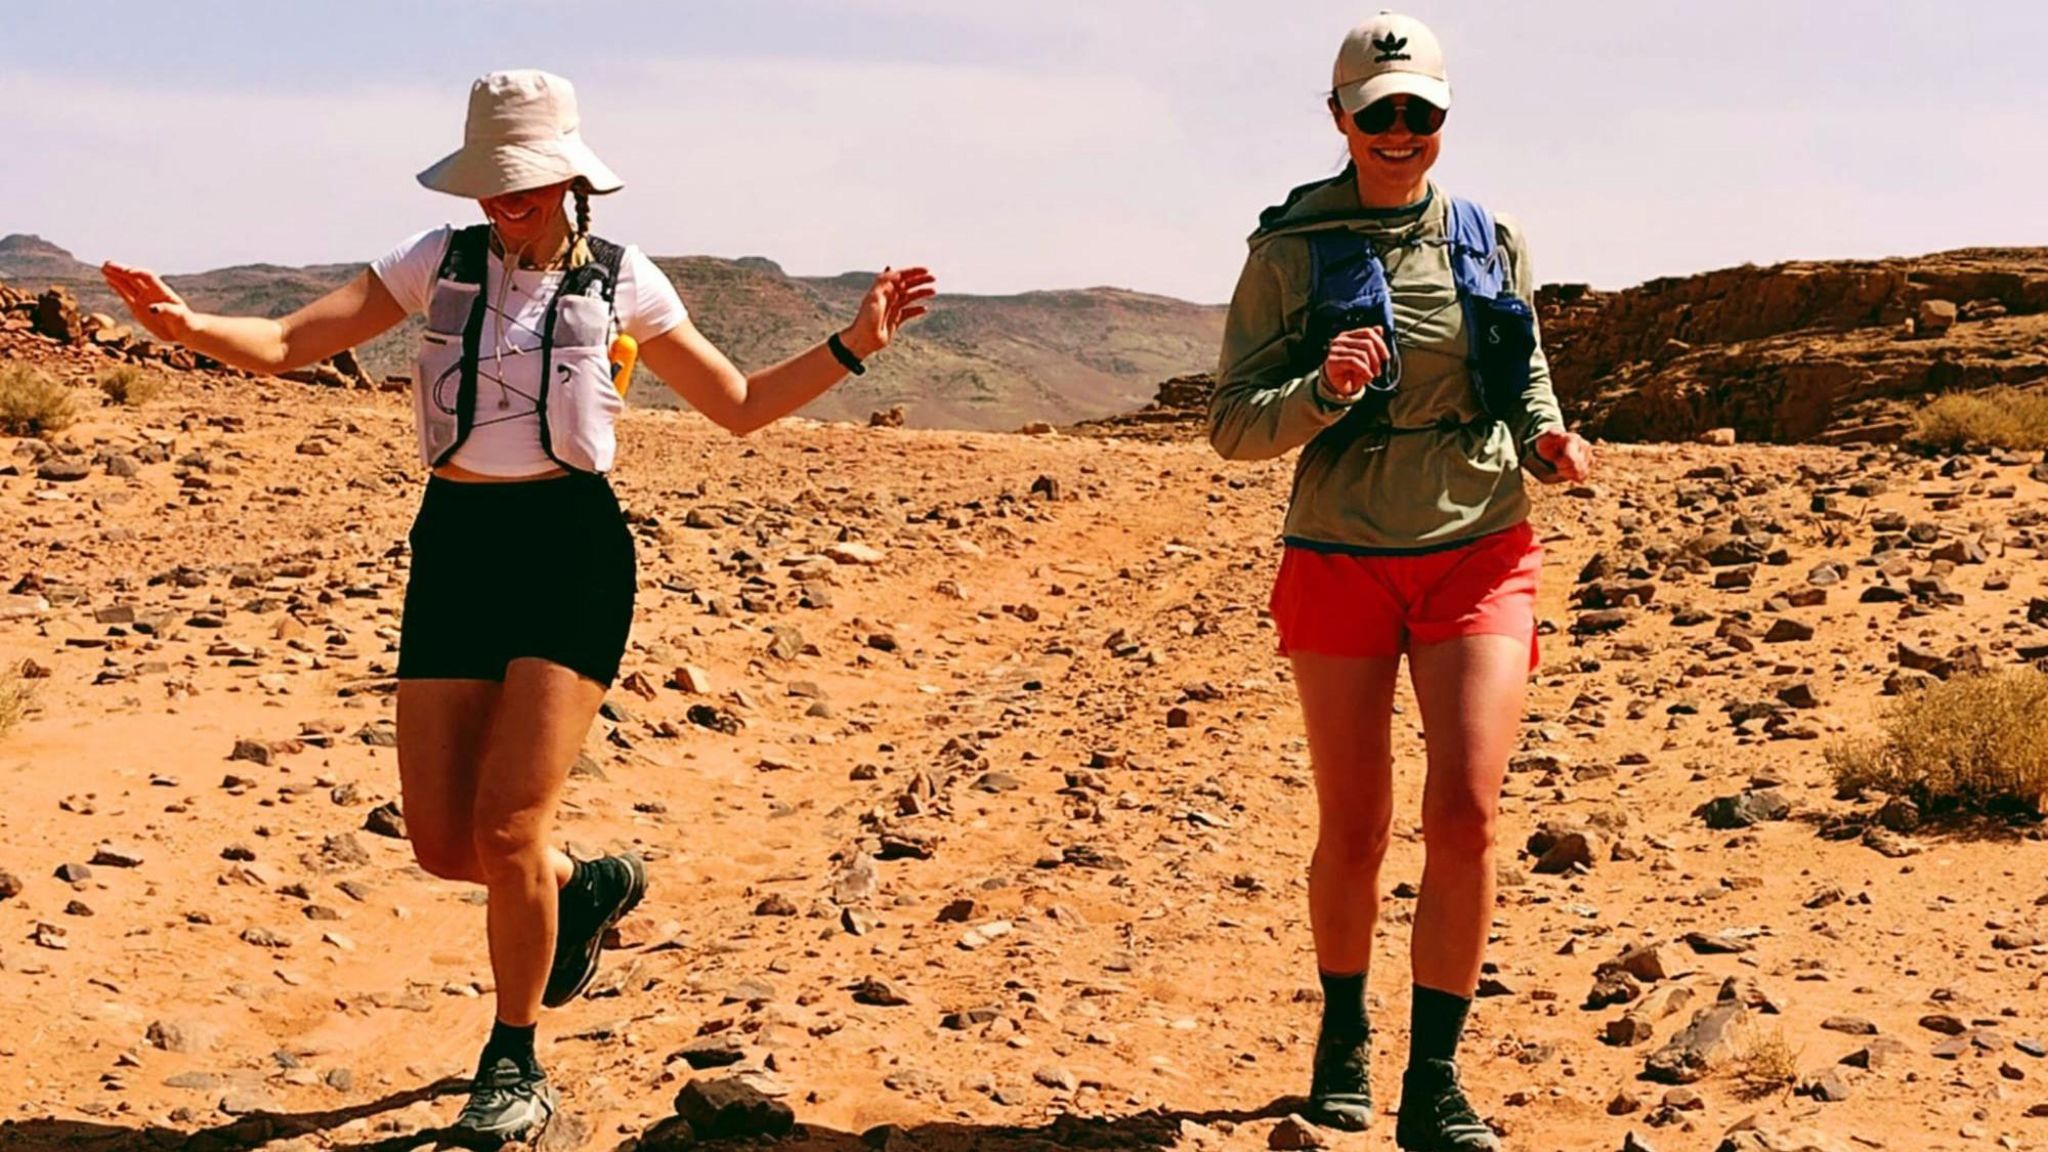 Philippa Morris and another runner in the desert